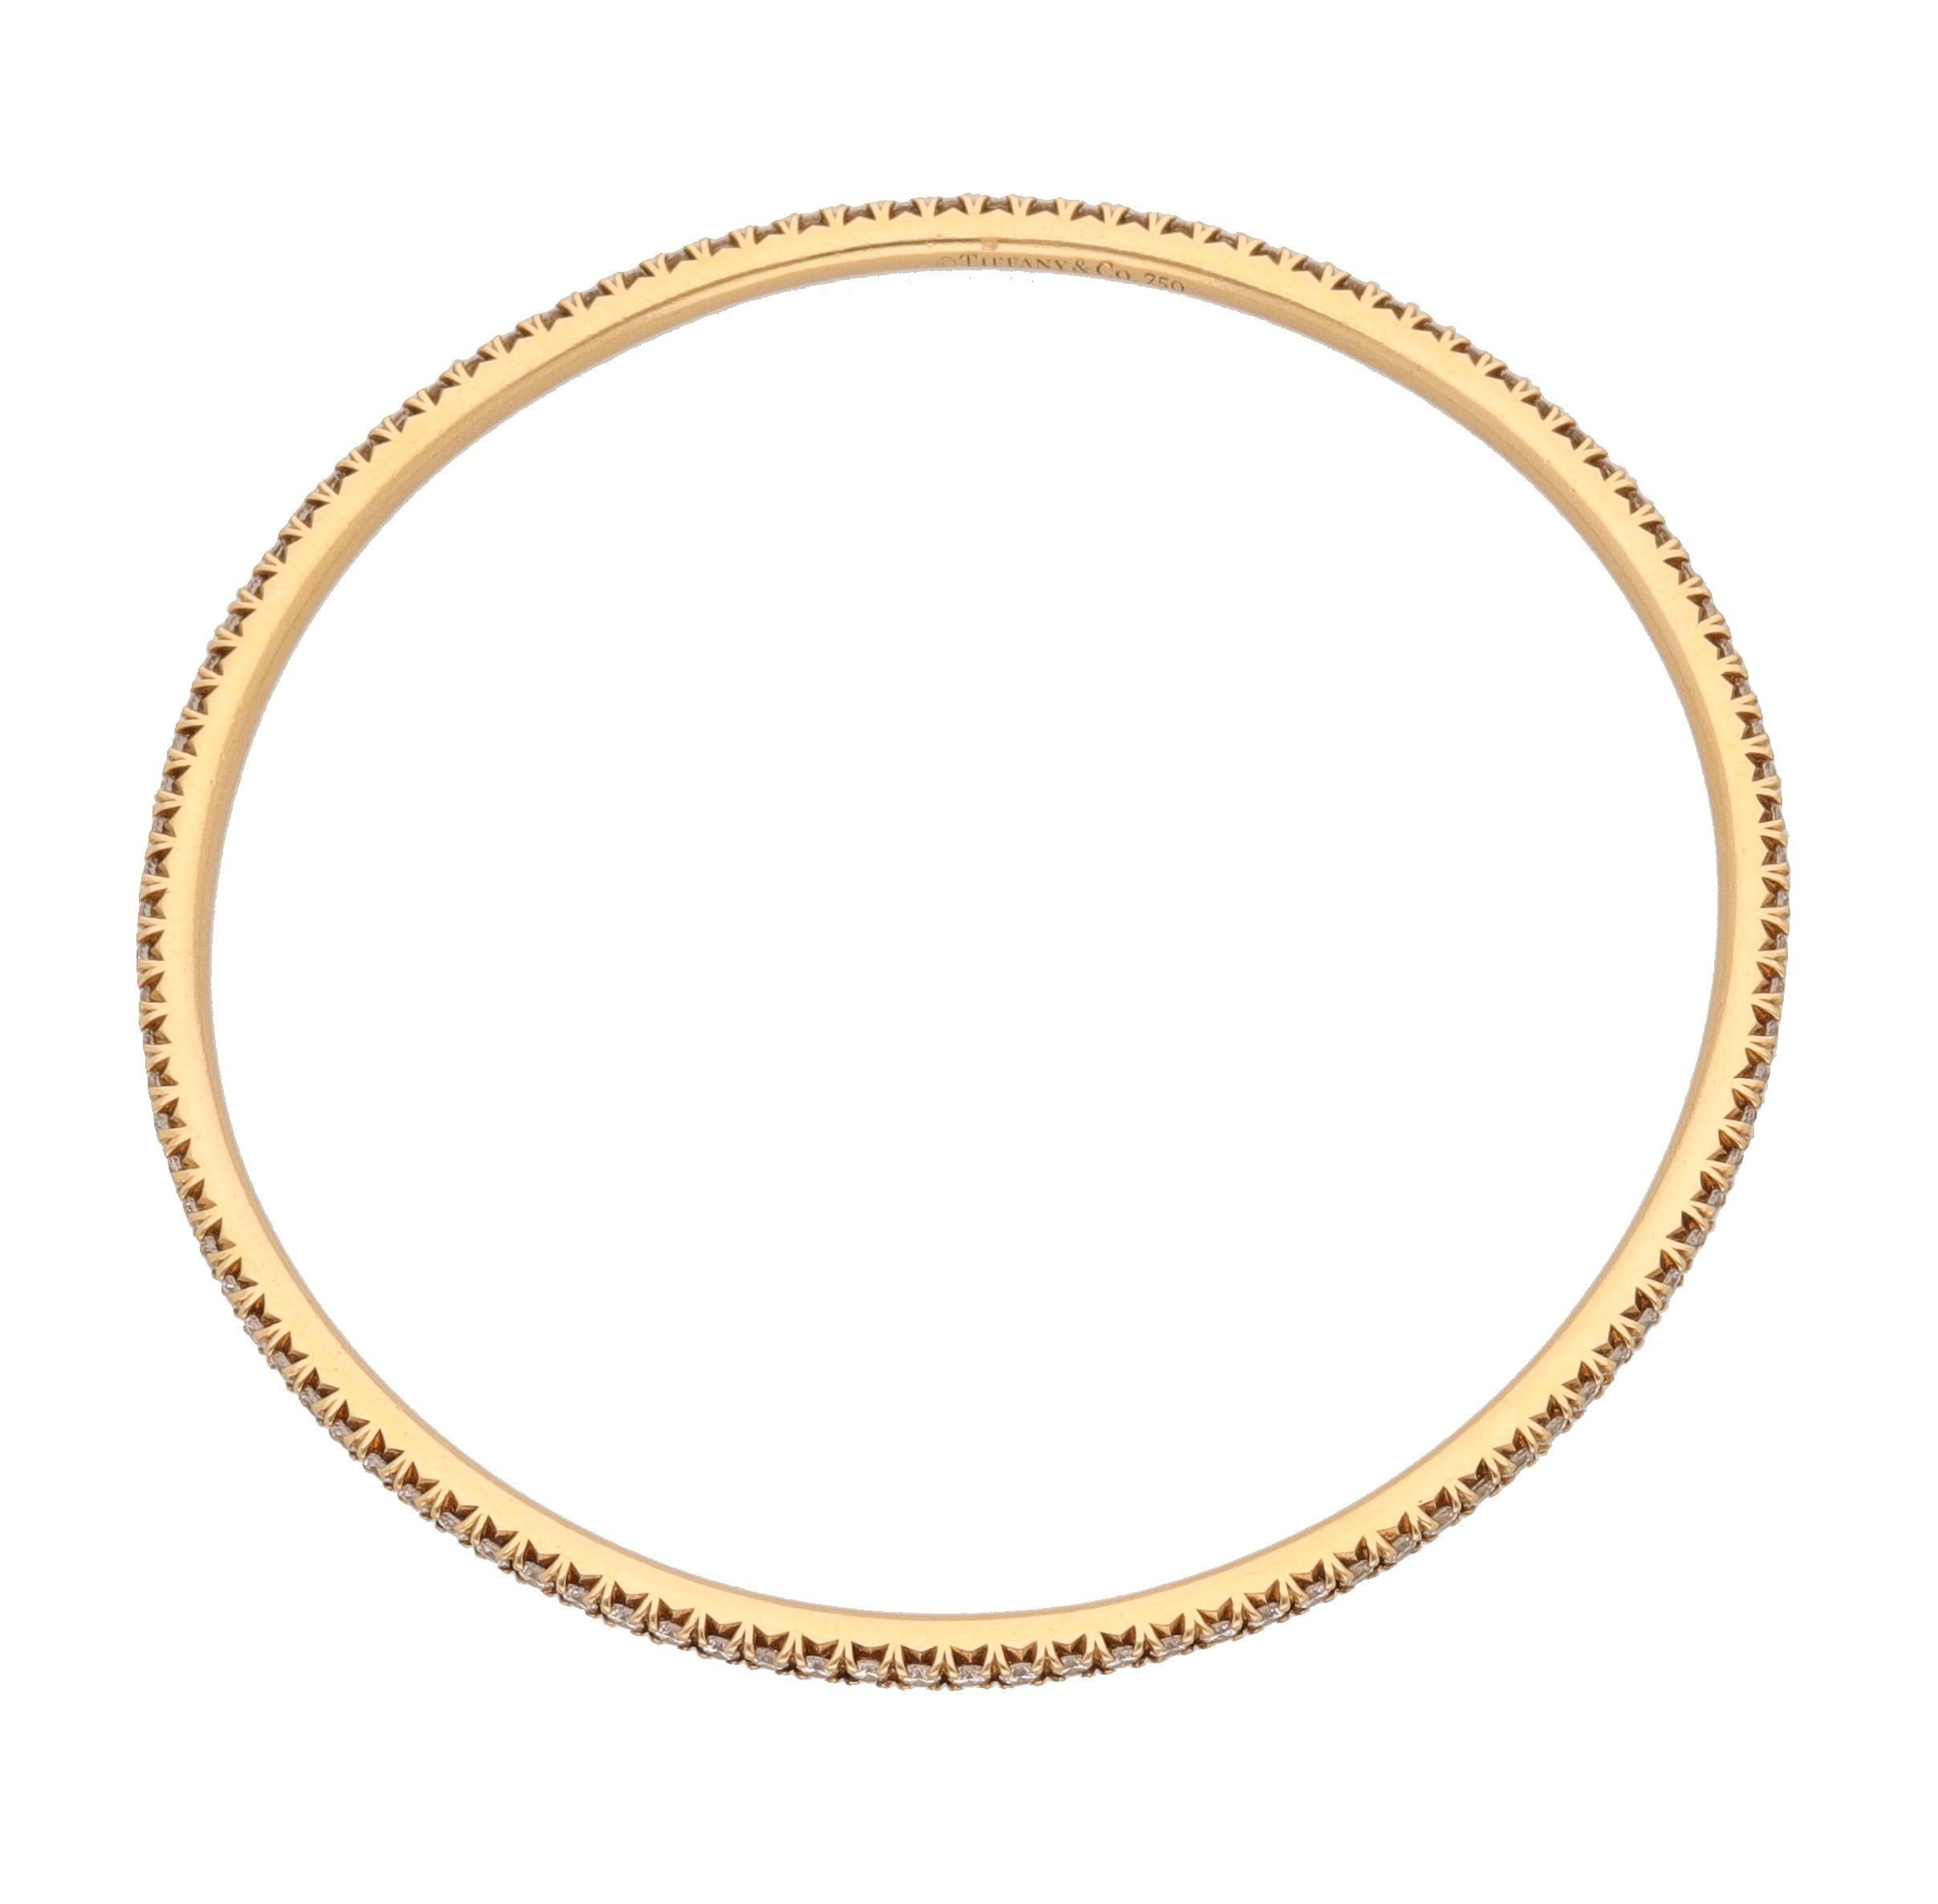 18 kt. yellow gold bangle with 1.59 carat of round-cut diamonds.
This modern bangle is signed by Tiffany and is from Metro Collection.
Is a medium size and fit for maximum 159 mm. wrist.
